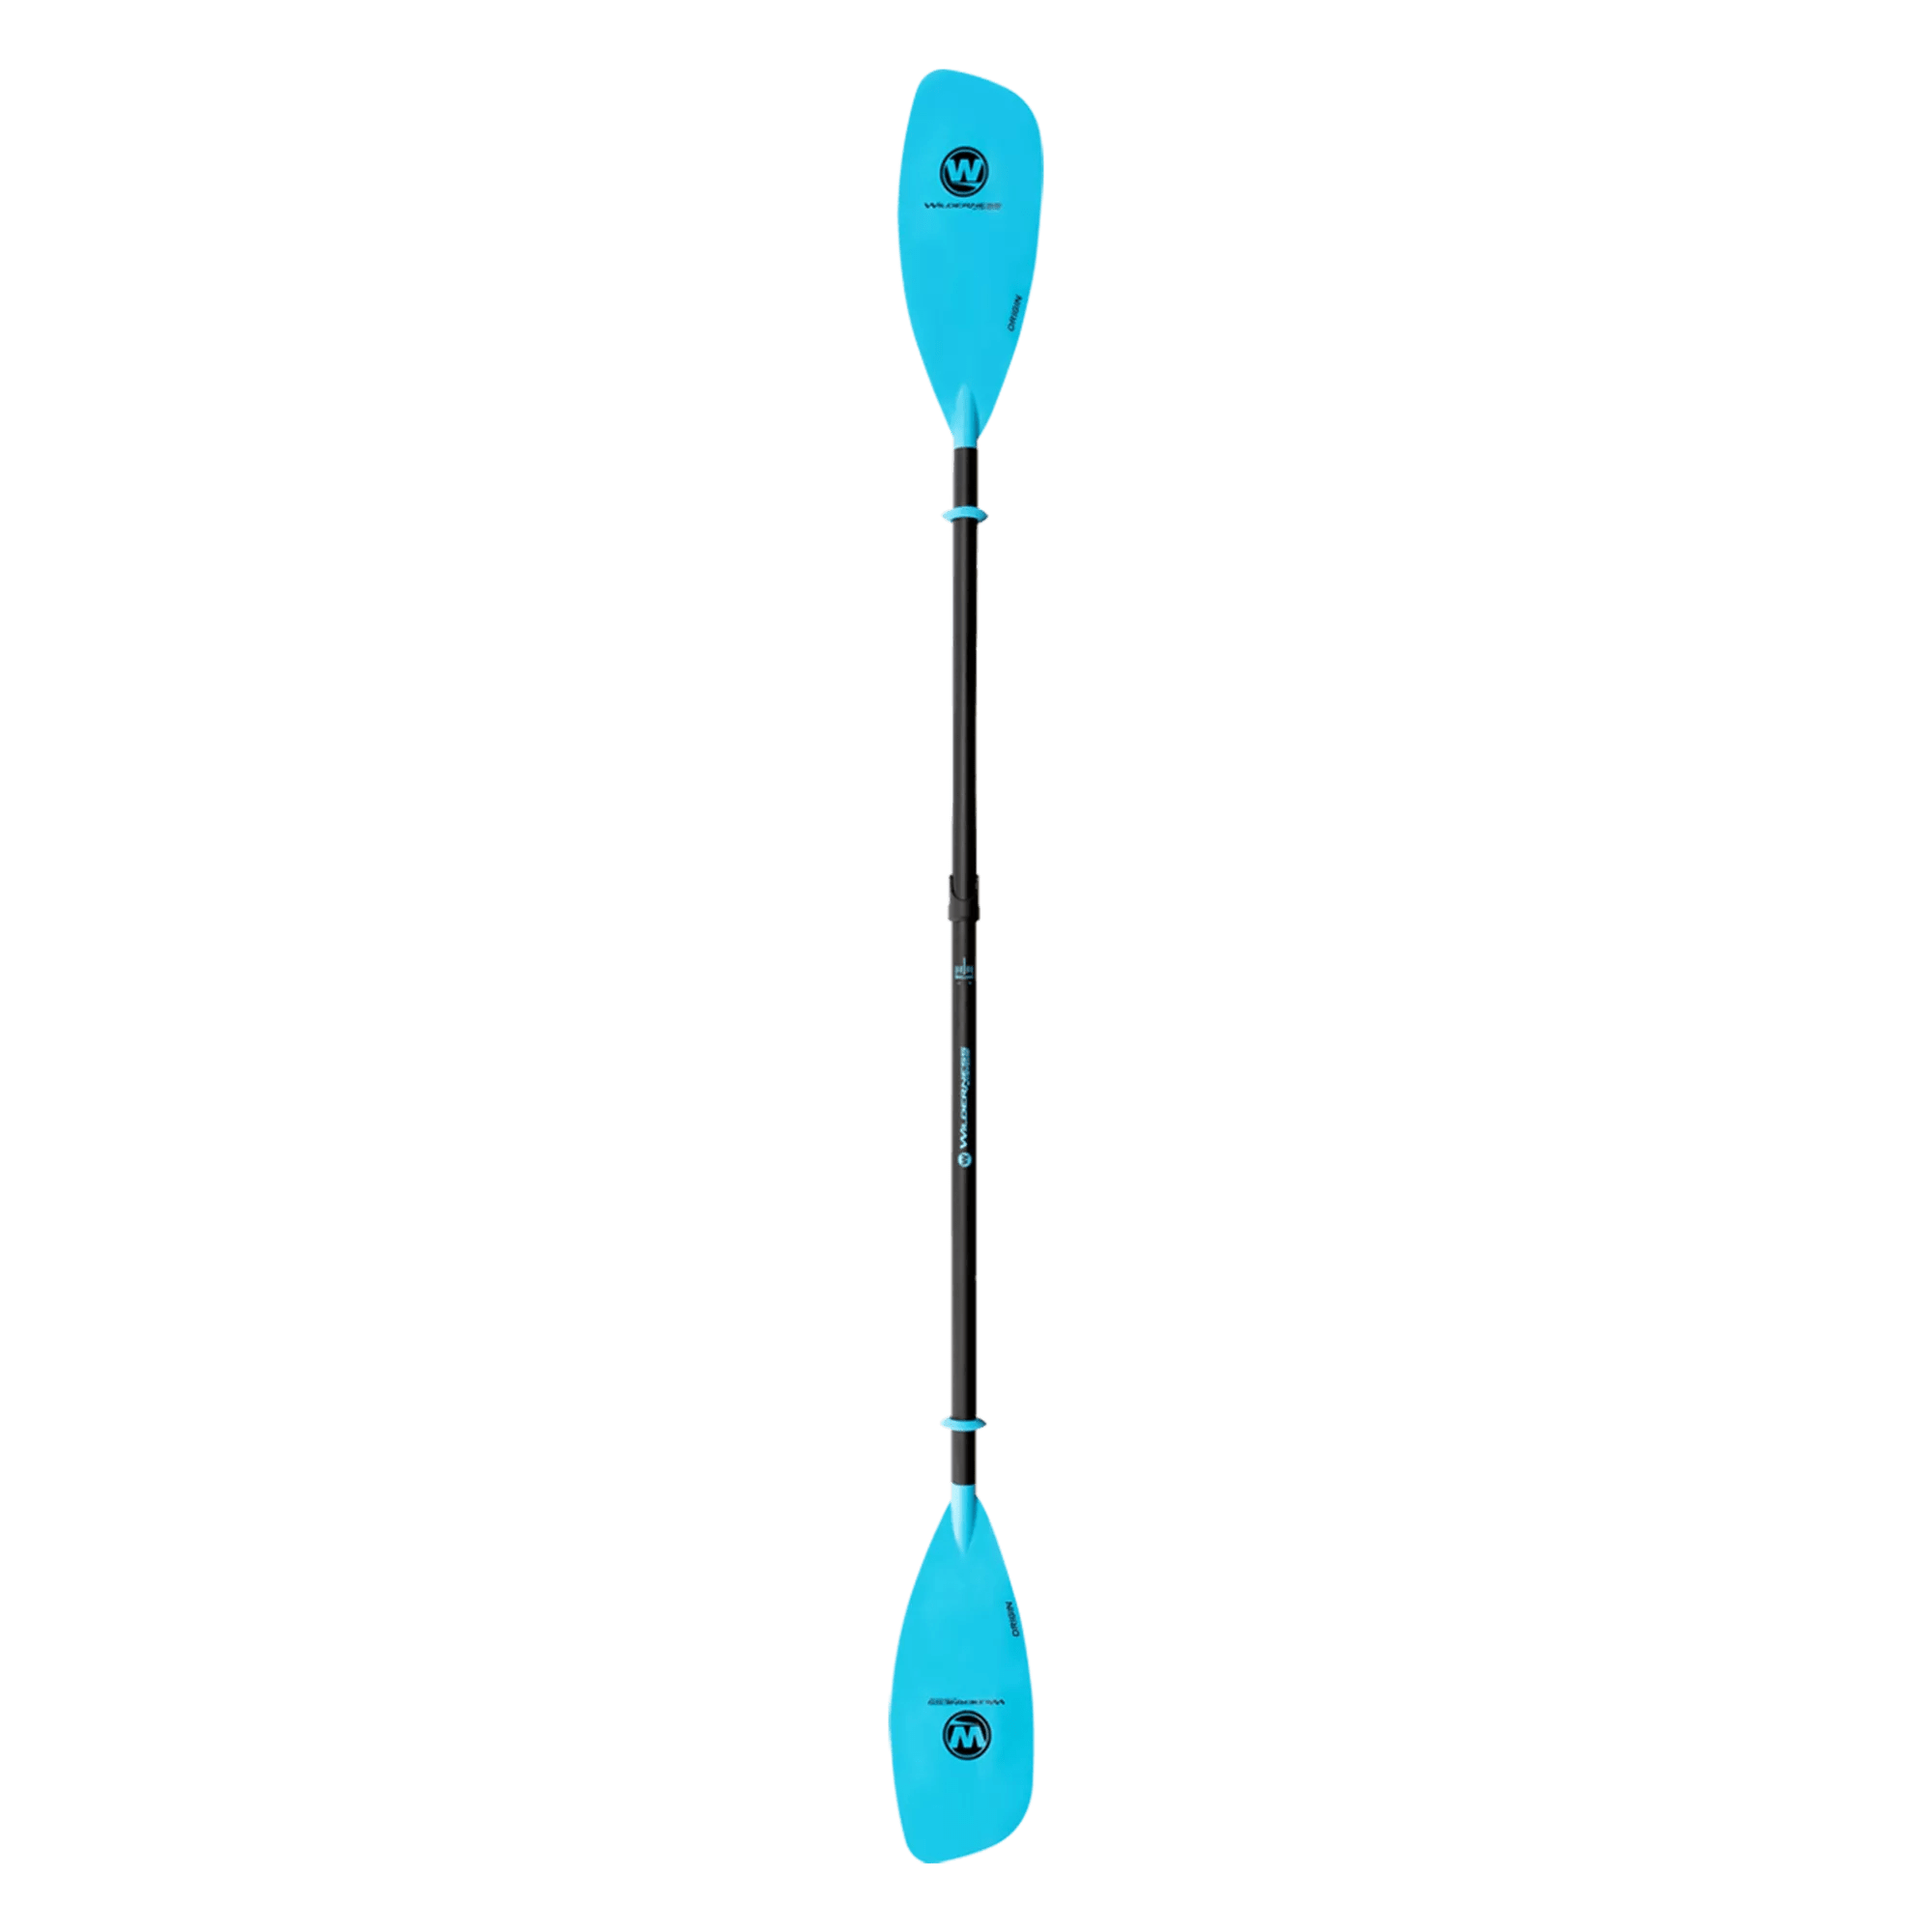 WILDERNESS SYSTEMS - Origin Glass Touring Paddle 220-240 cm - Blue - 8070207 - SIDE